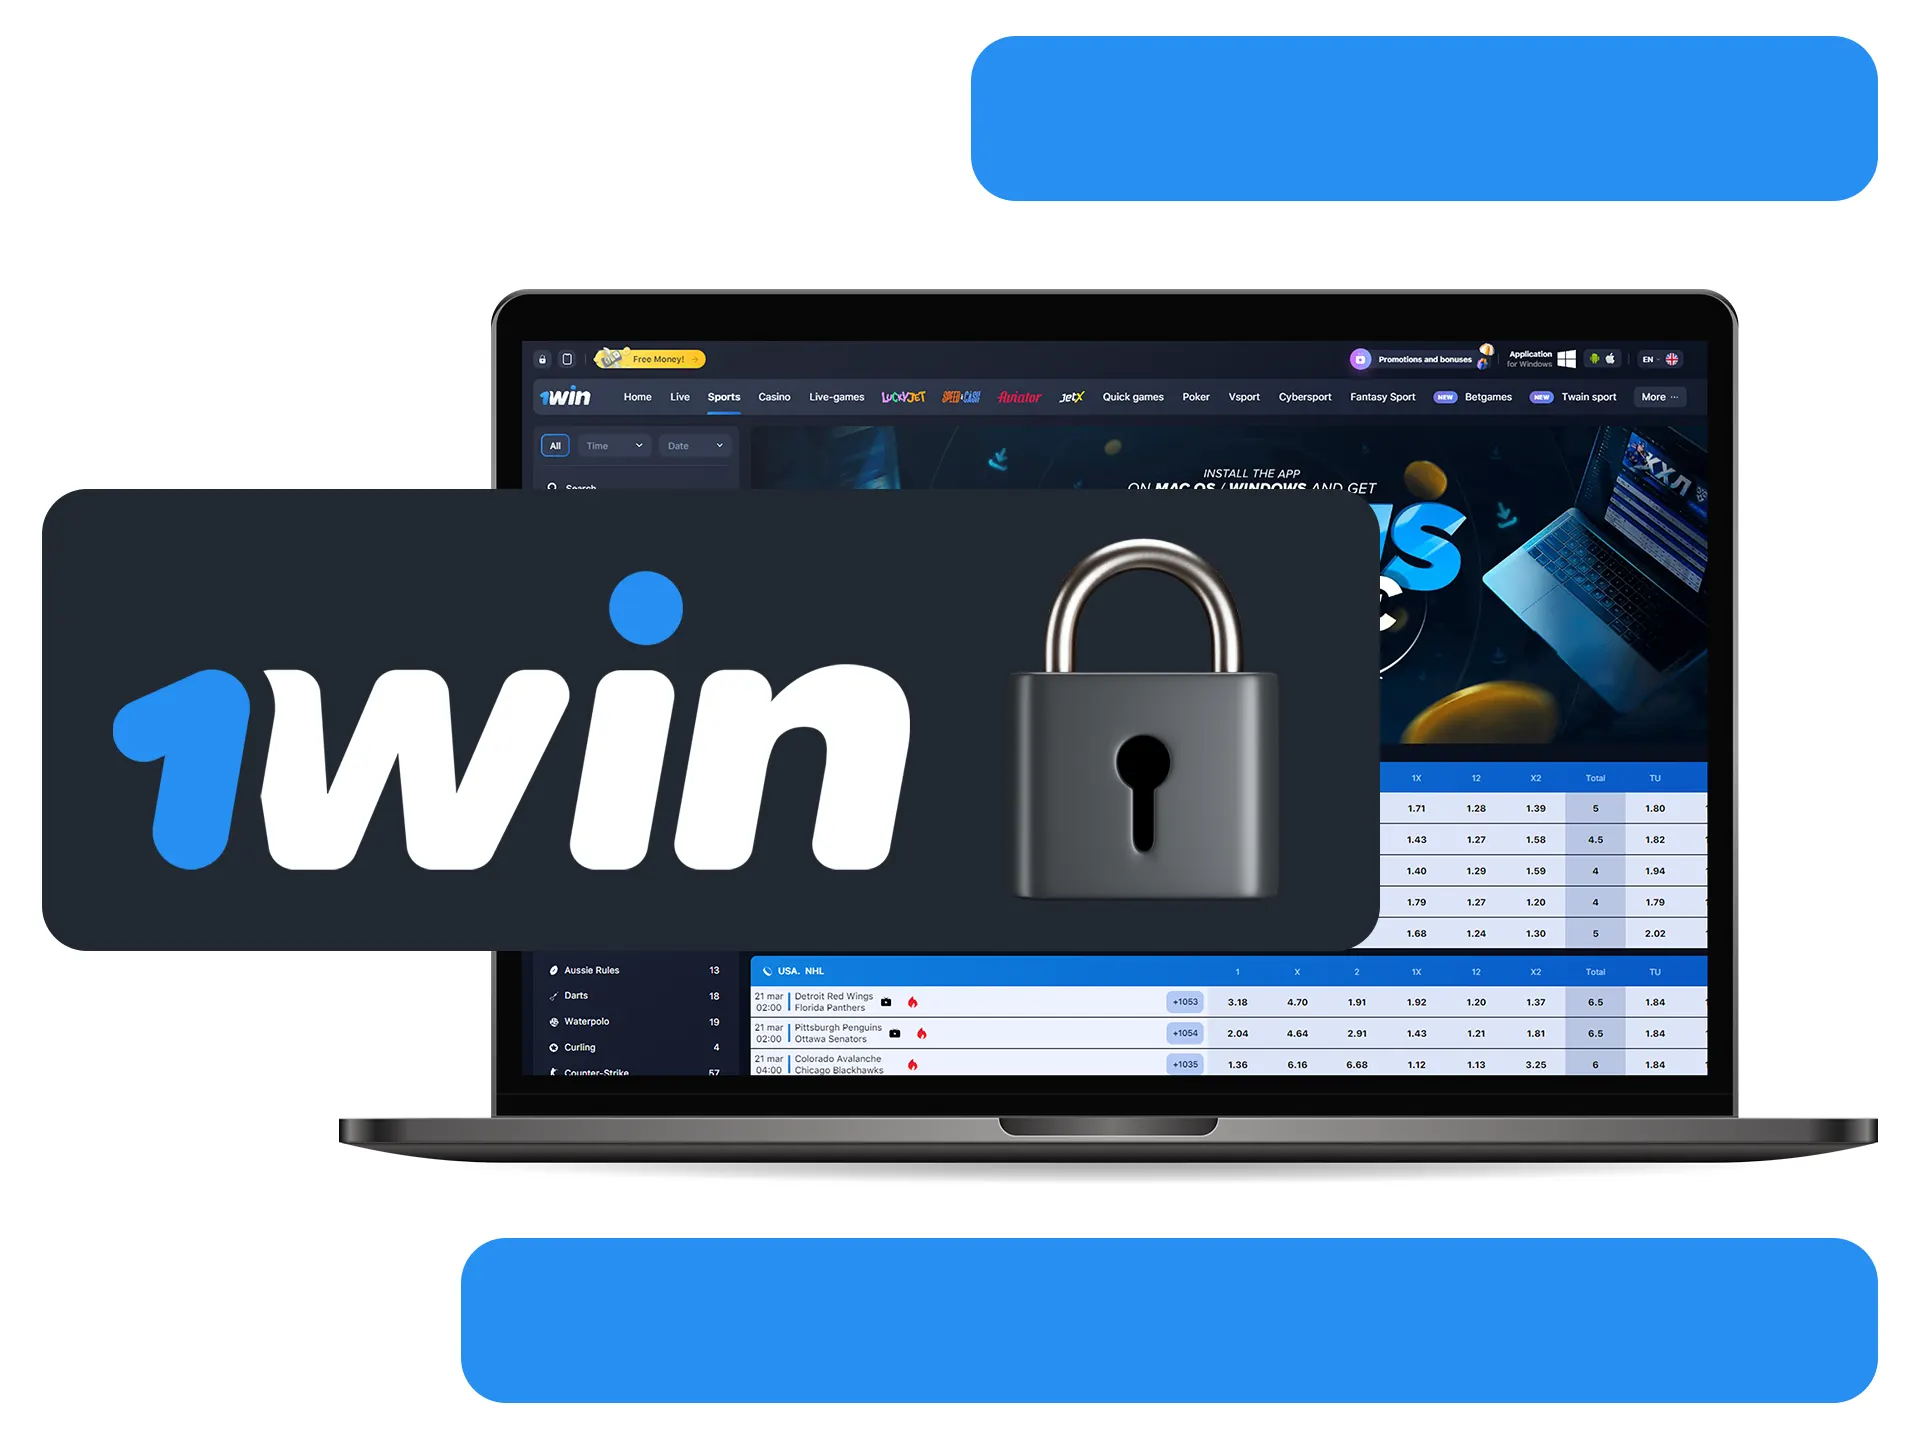 1win keeps all of your personal data safe.